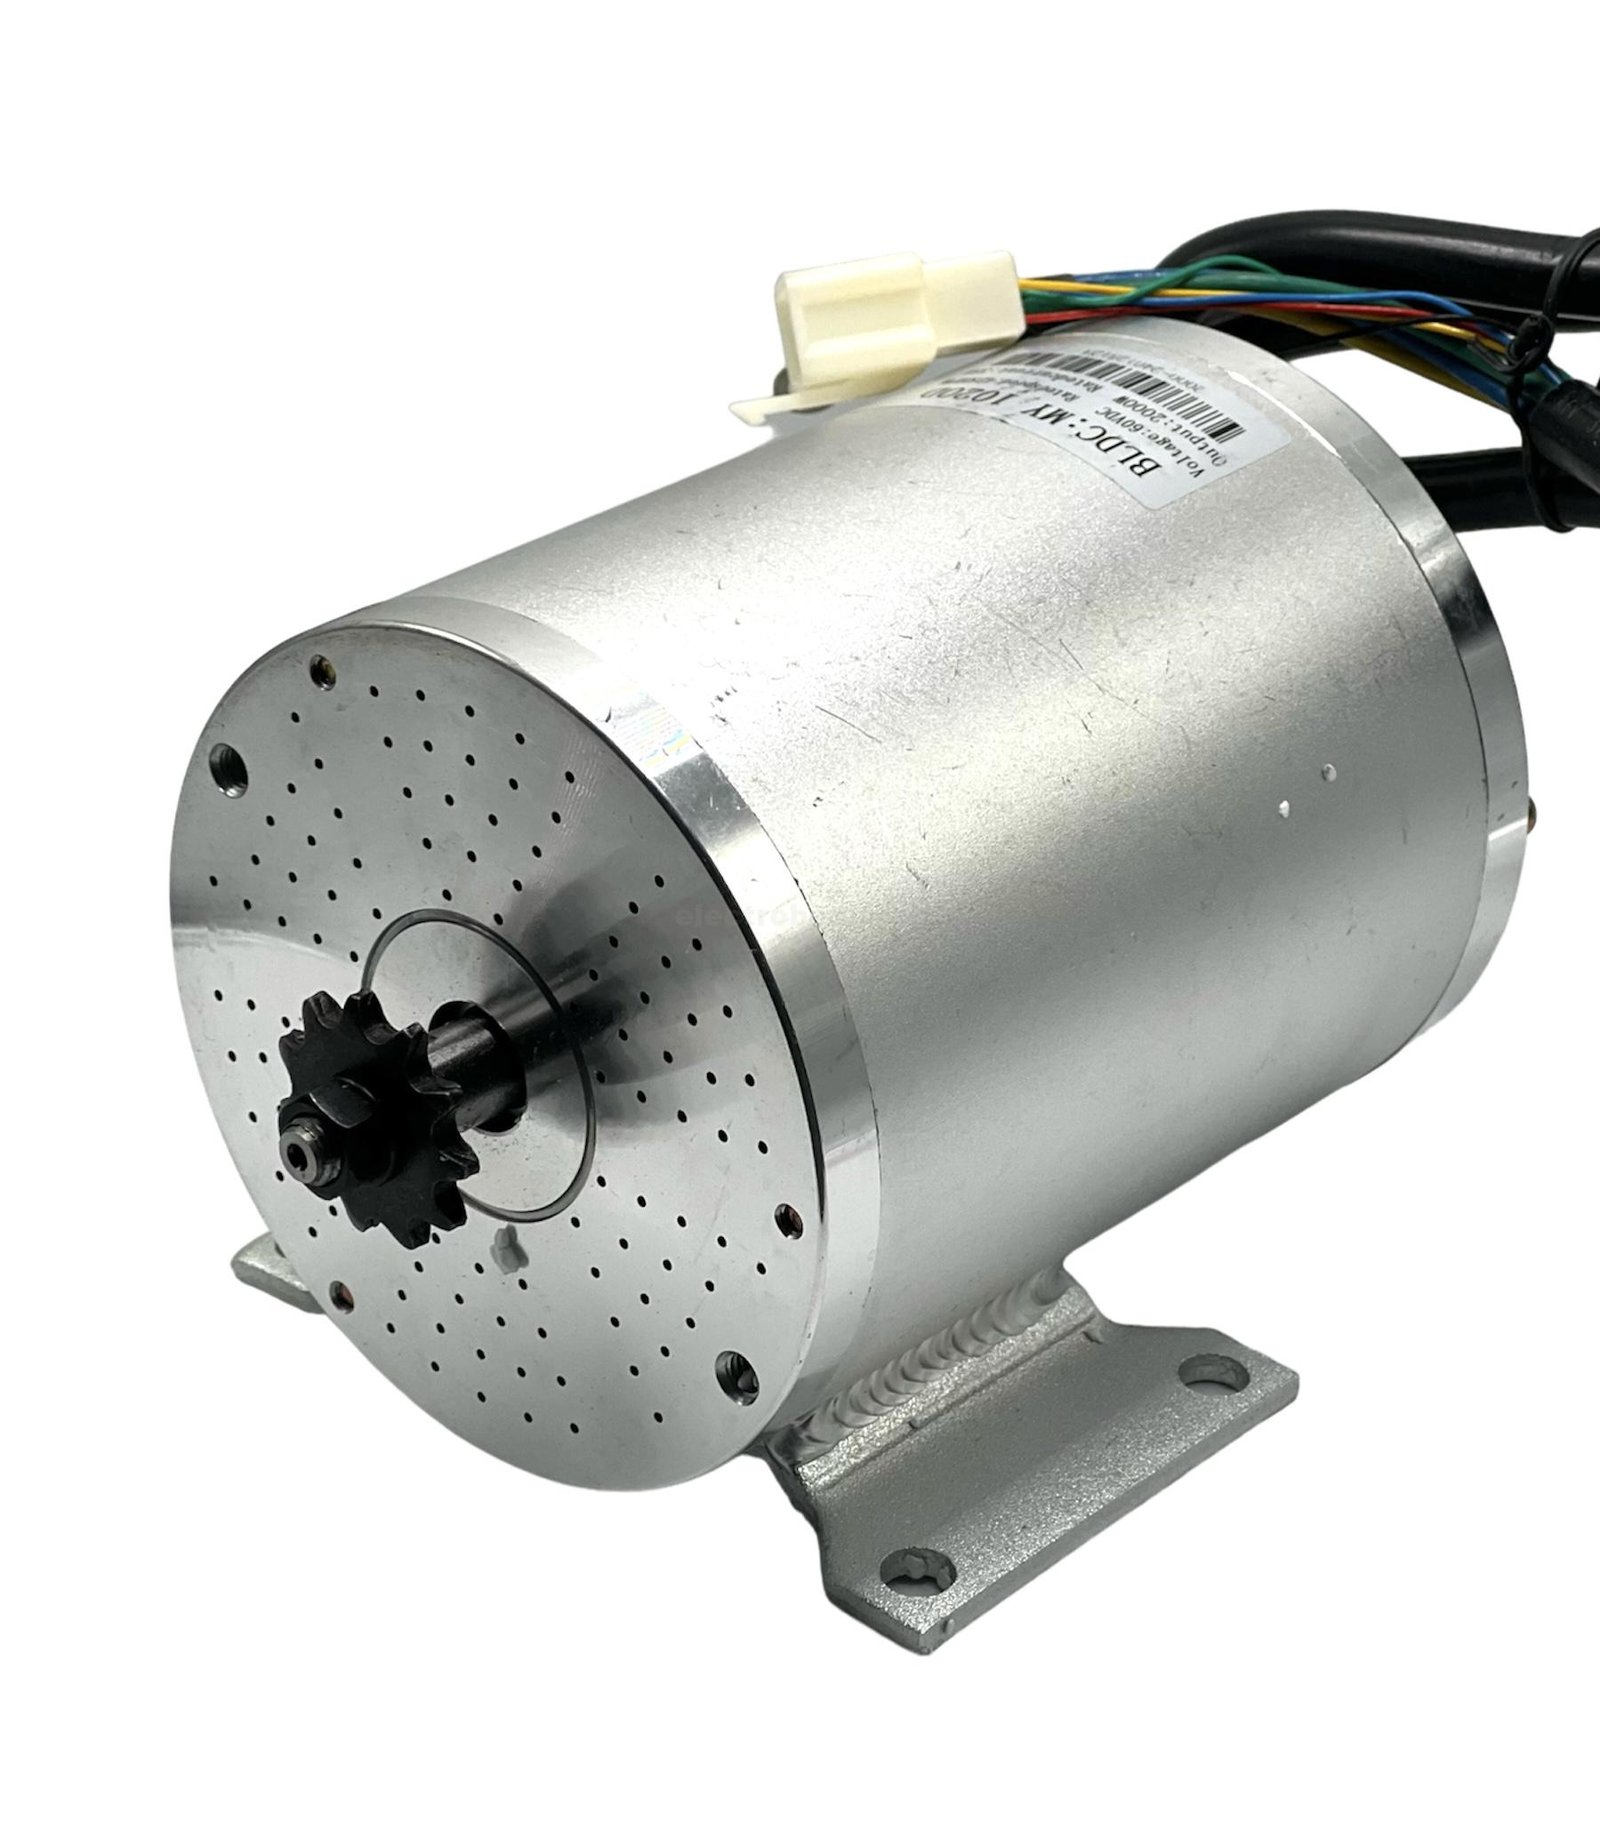 48V 5200rpm 2000W Electric Brushless DC Motor with Controller, Pedal and Throttle Kit for Go Karts E-Bike Electric Throttle Motorcycle Scooter at best price online in islamabad rawalpindi lahore peshawar faisalabad karachi hyderabad quetta wah taxila Pakistan